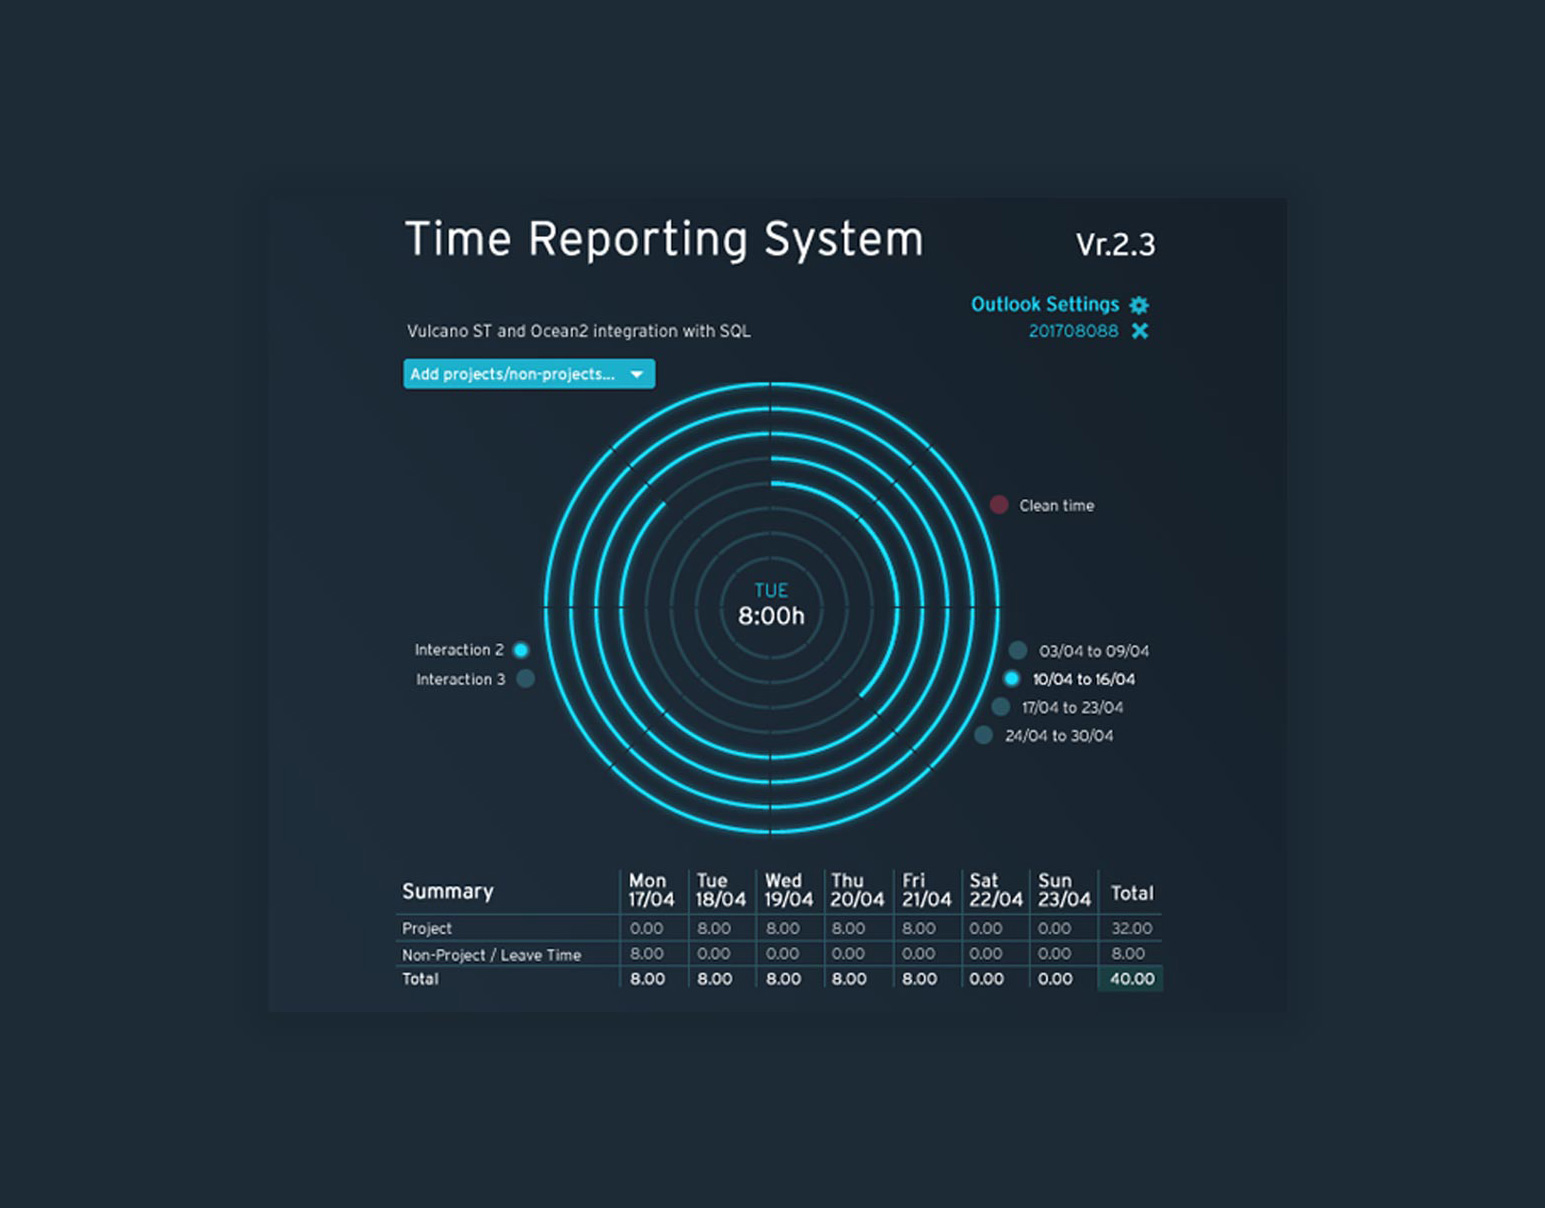 TRS – Time Reporting System